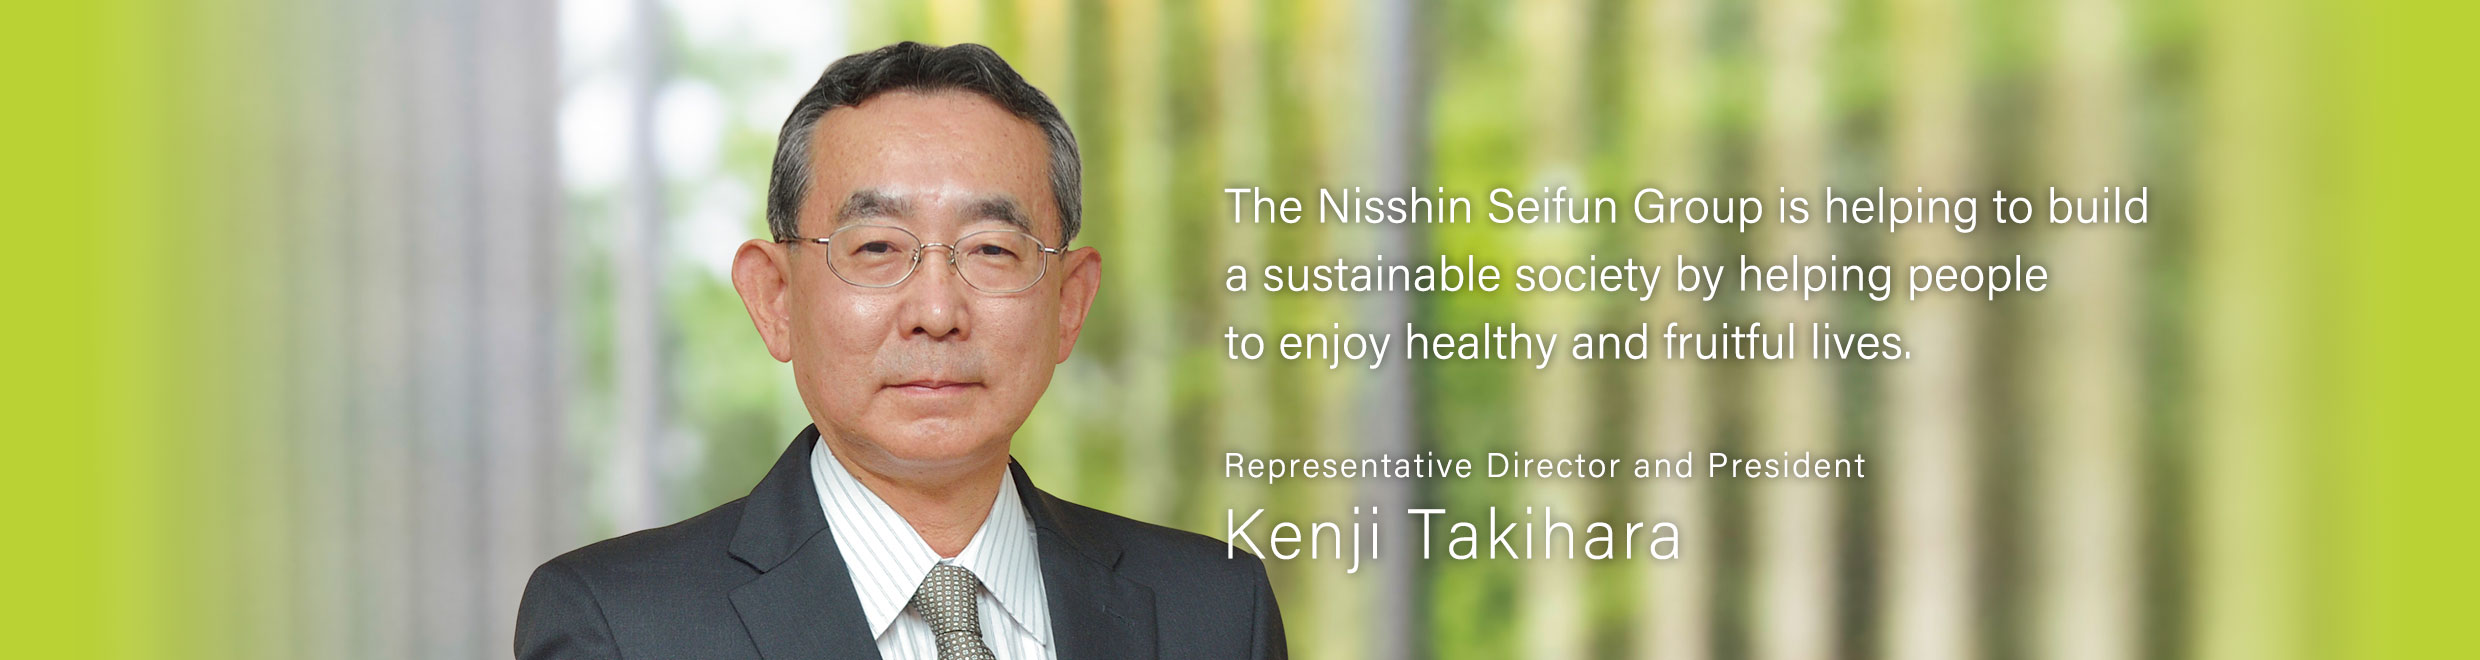 The Nisshin Seifun group is helping to build a sustainable society by helping people to enjoy healthy and fruitful lives. Kenji Takihara, Representative Director and President, Nisshin Seifun Group Inc.